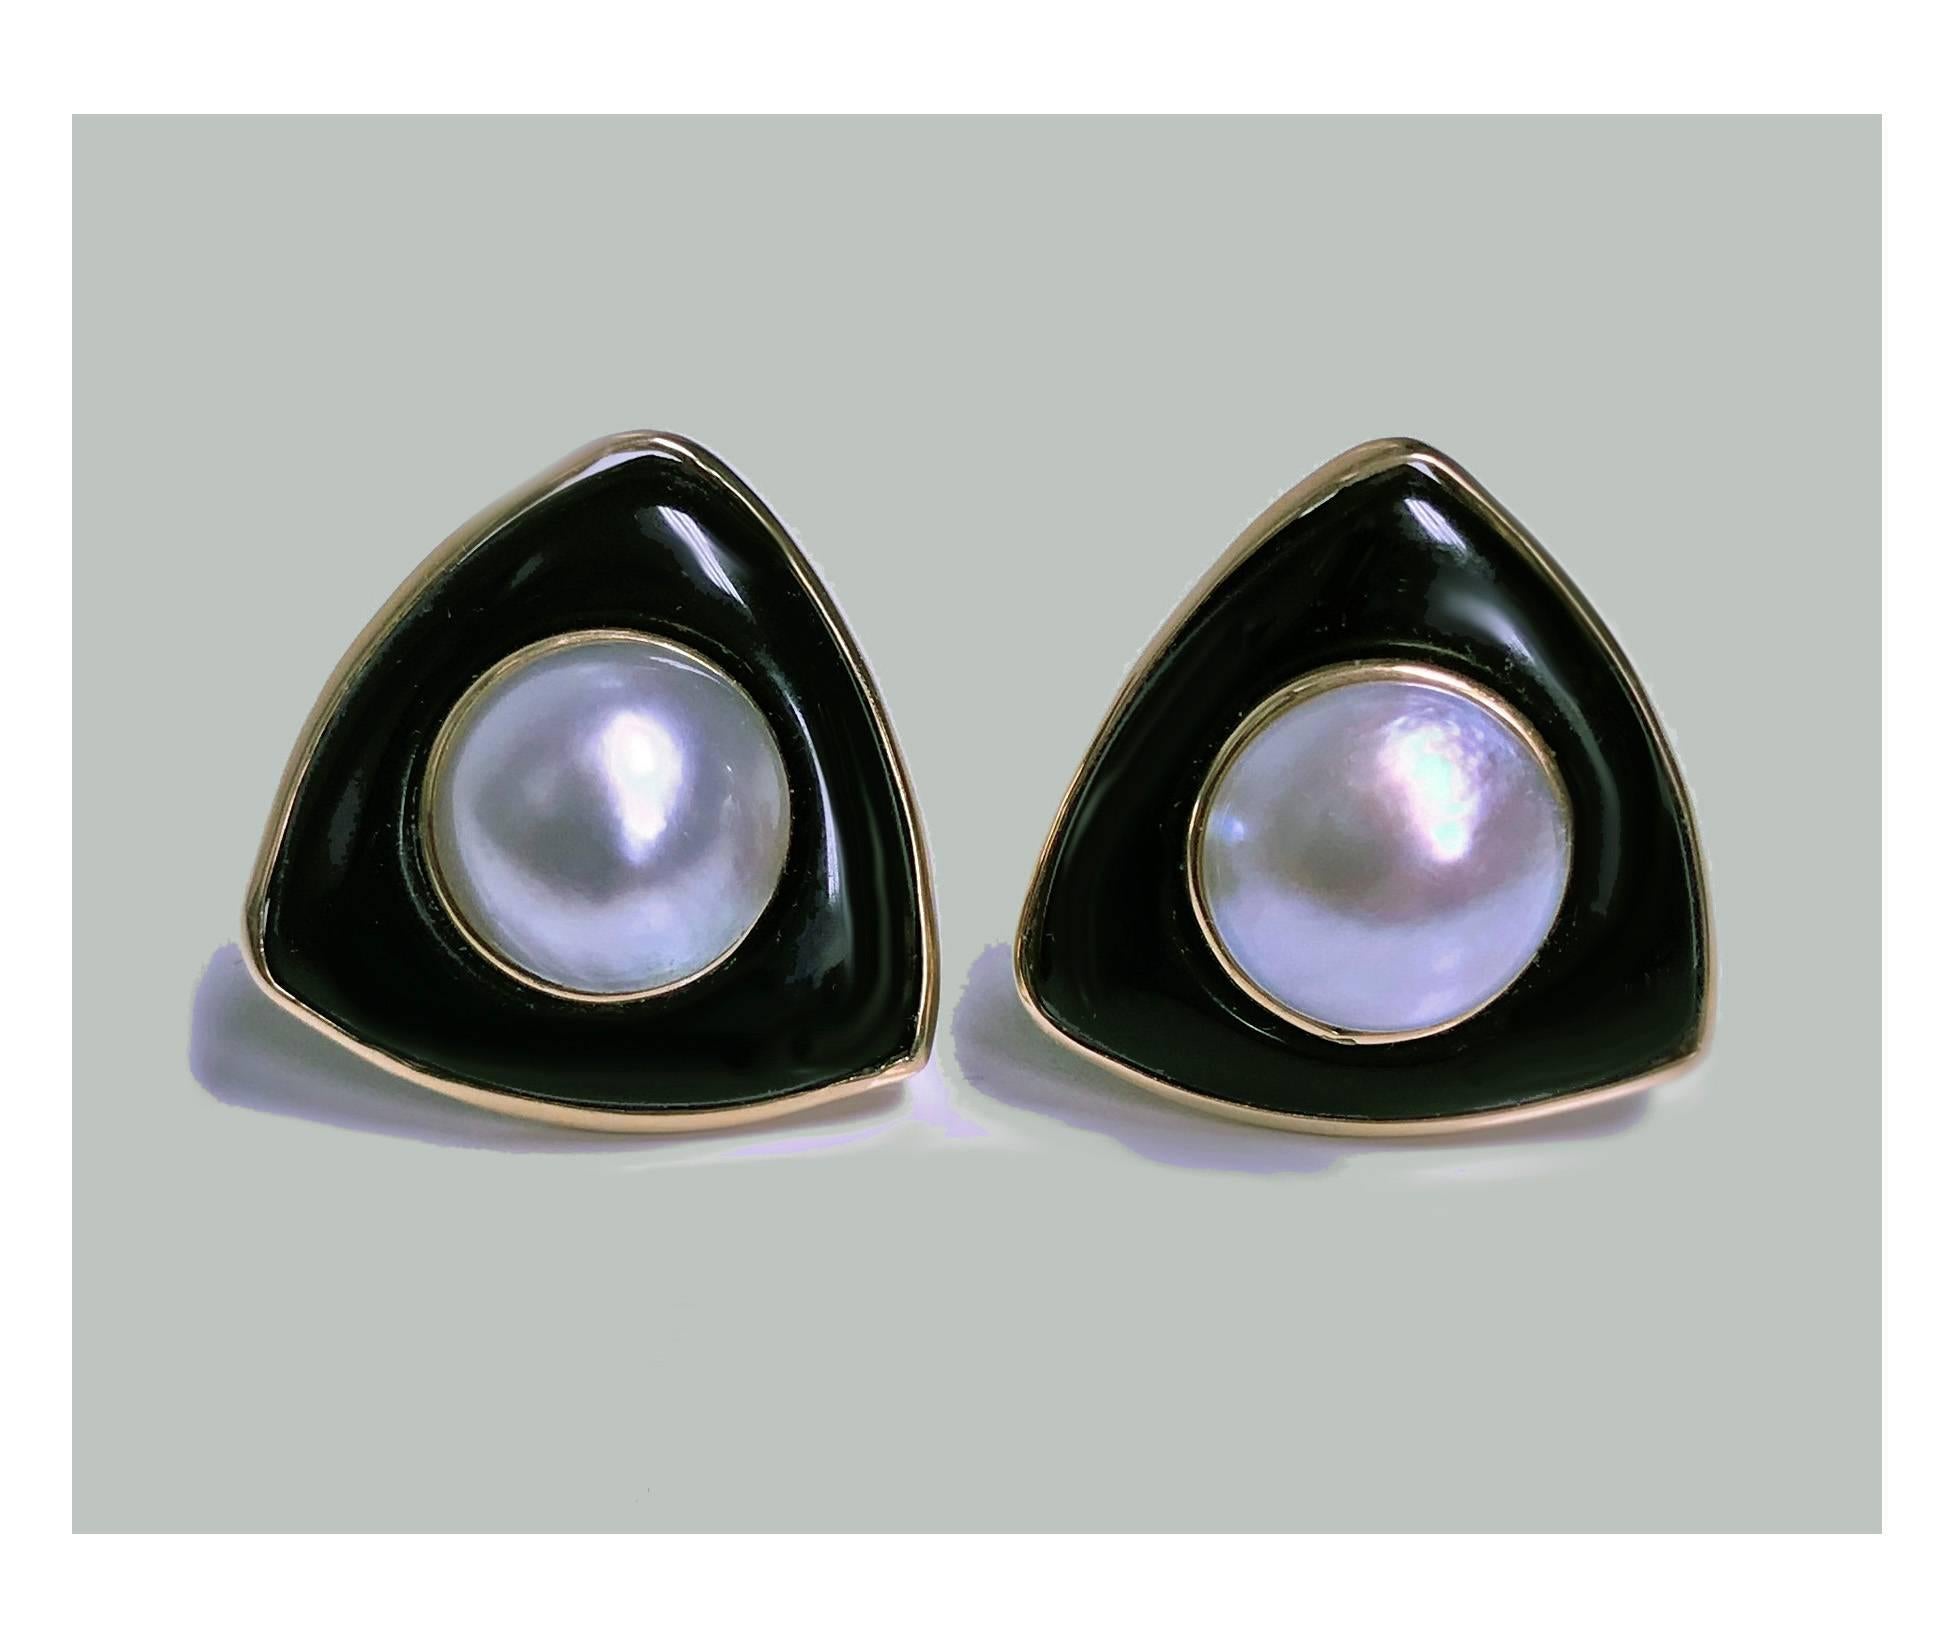 Black Onyx  Art Deco style Earrings with Mabe pearls set in 14K yellow gold, C.1970. and 14K yellow gold post and butterfly disc backs.Earrings measure approximately 25 x 25 mm. Total Item Weight: 16.56 grams